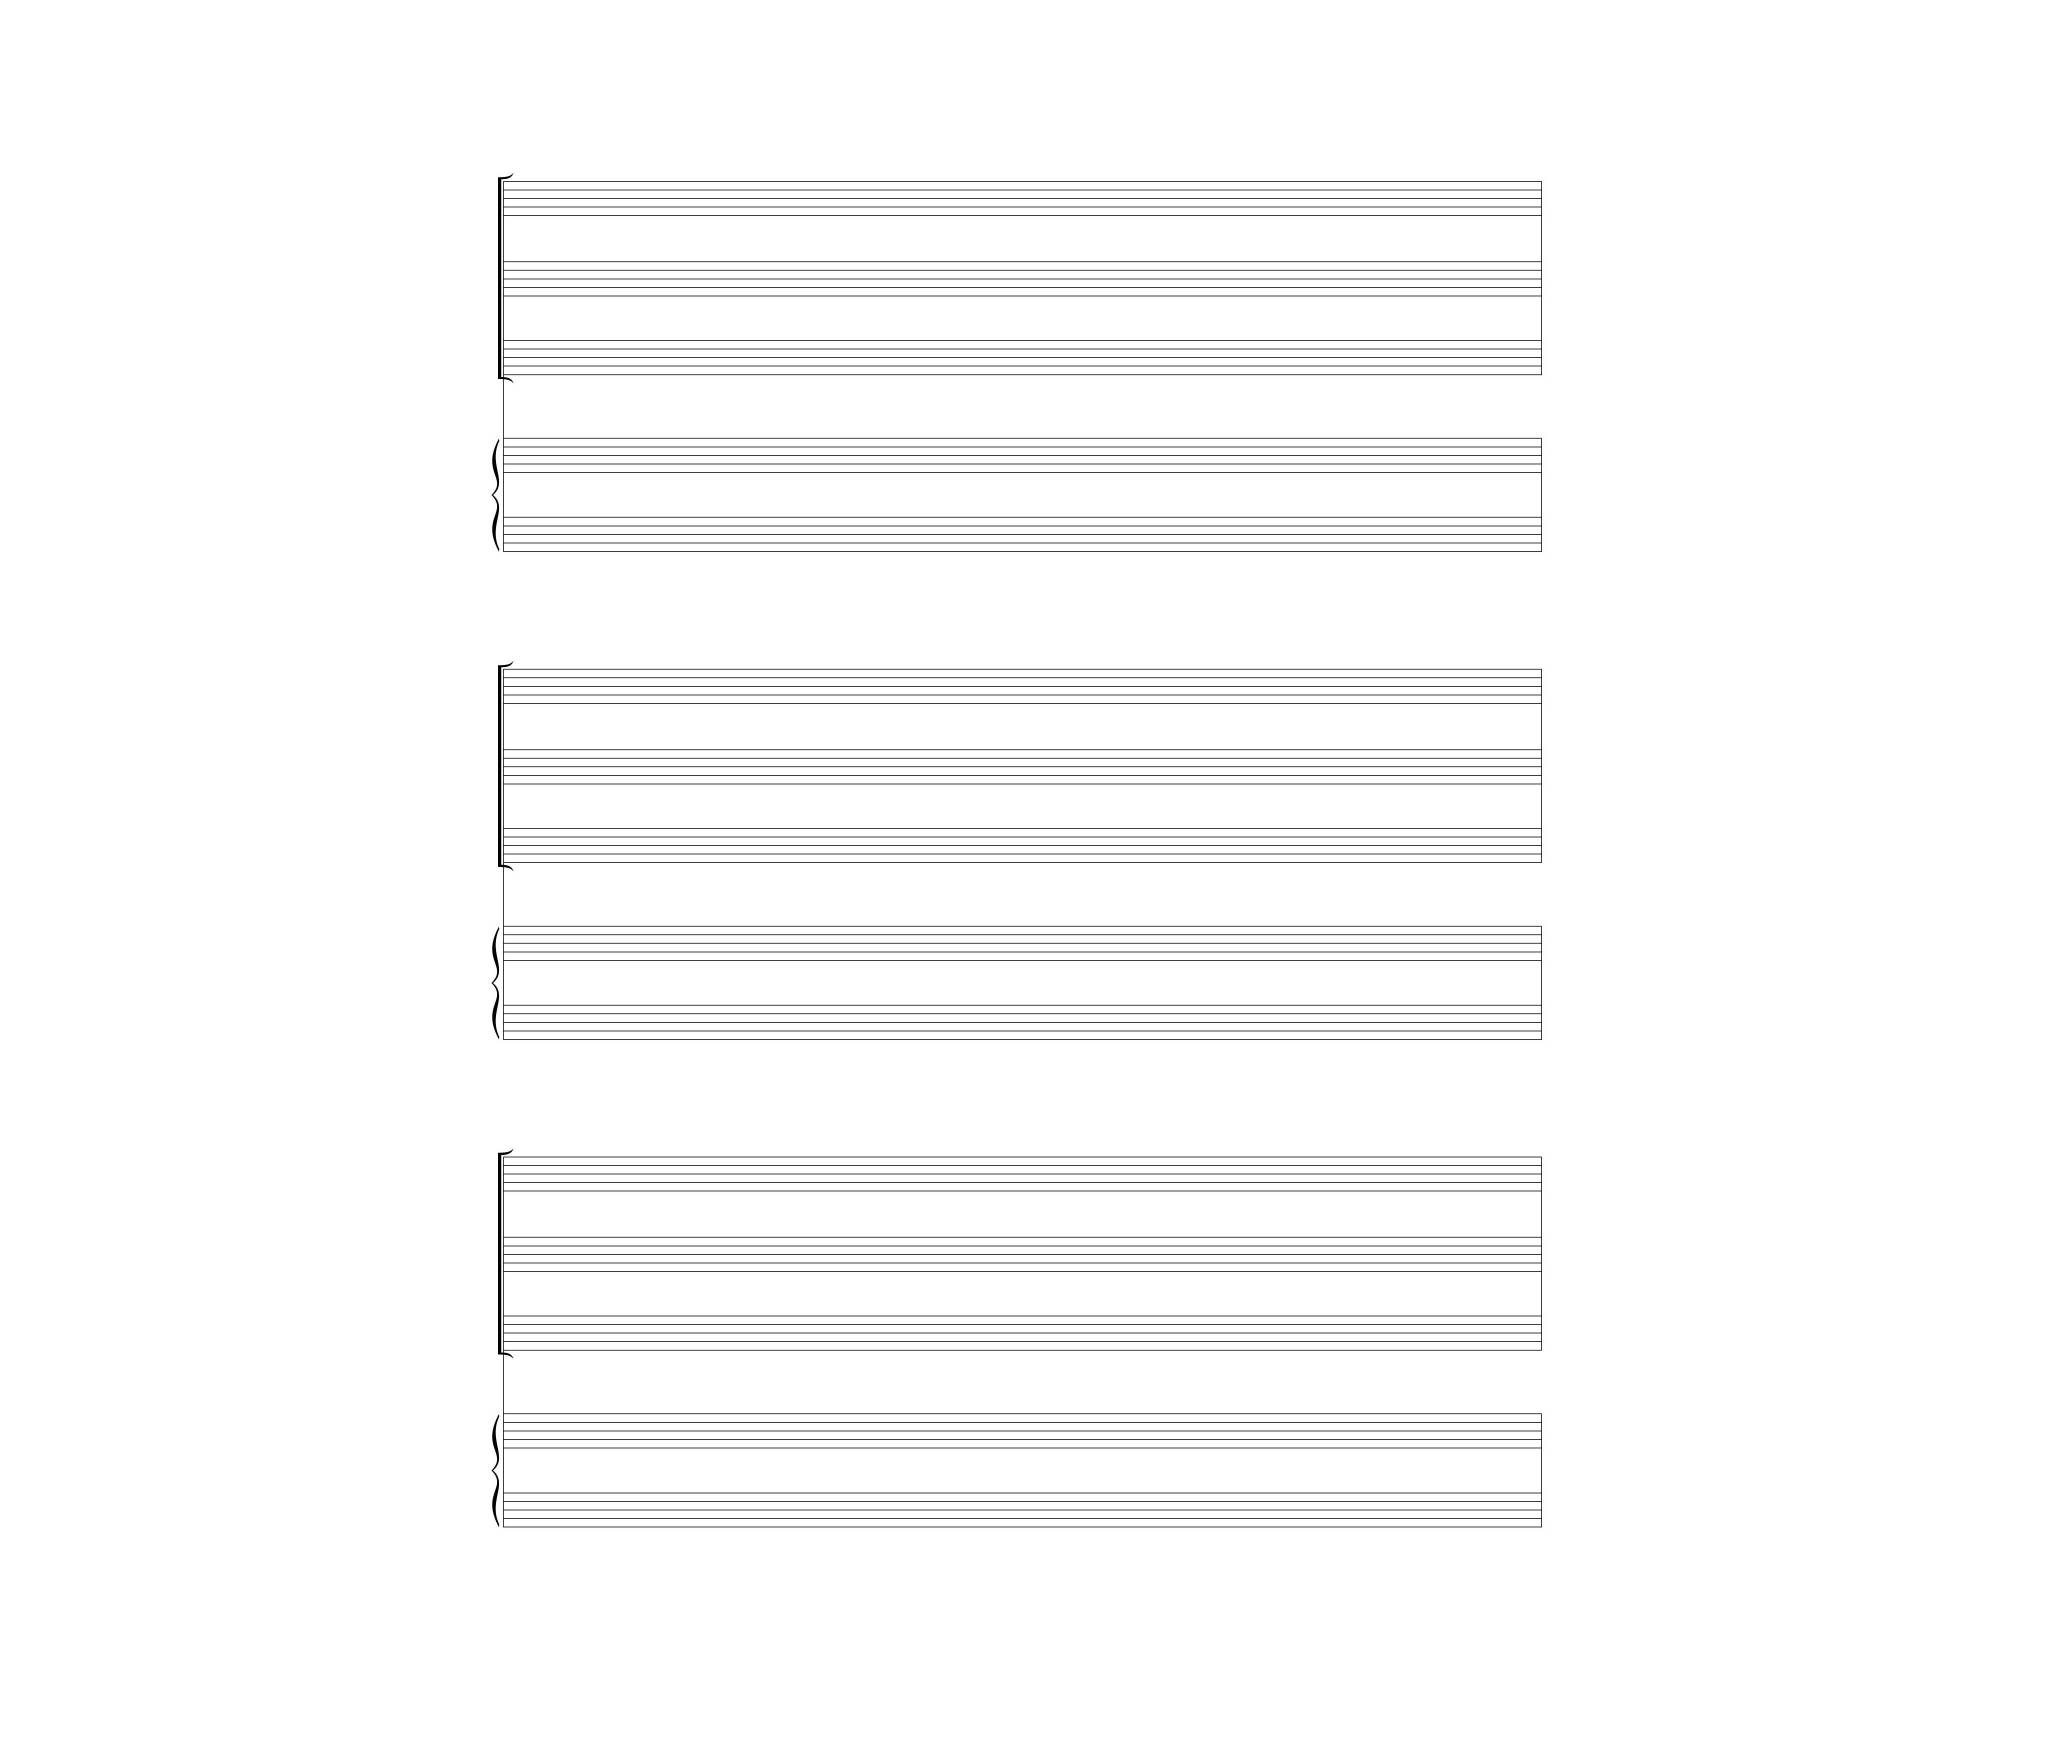 15-staves-without-clefs-blank-sheet-music